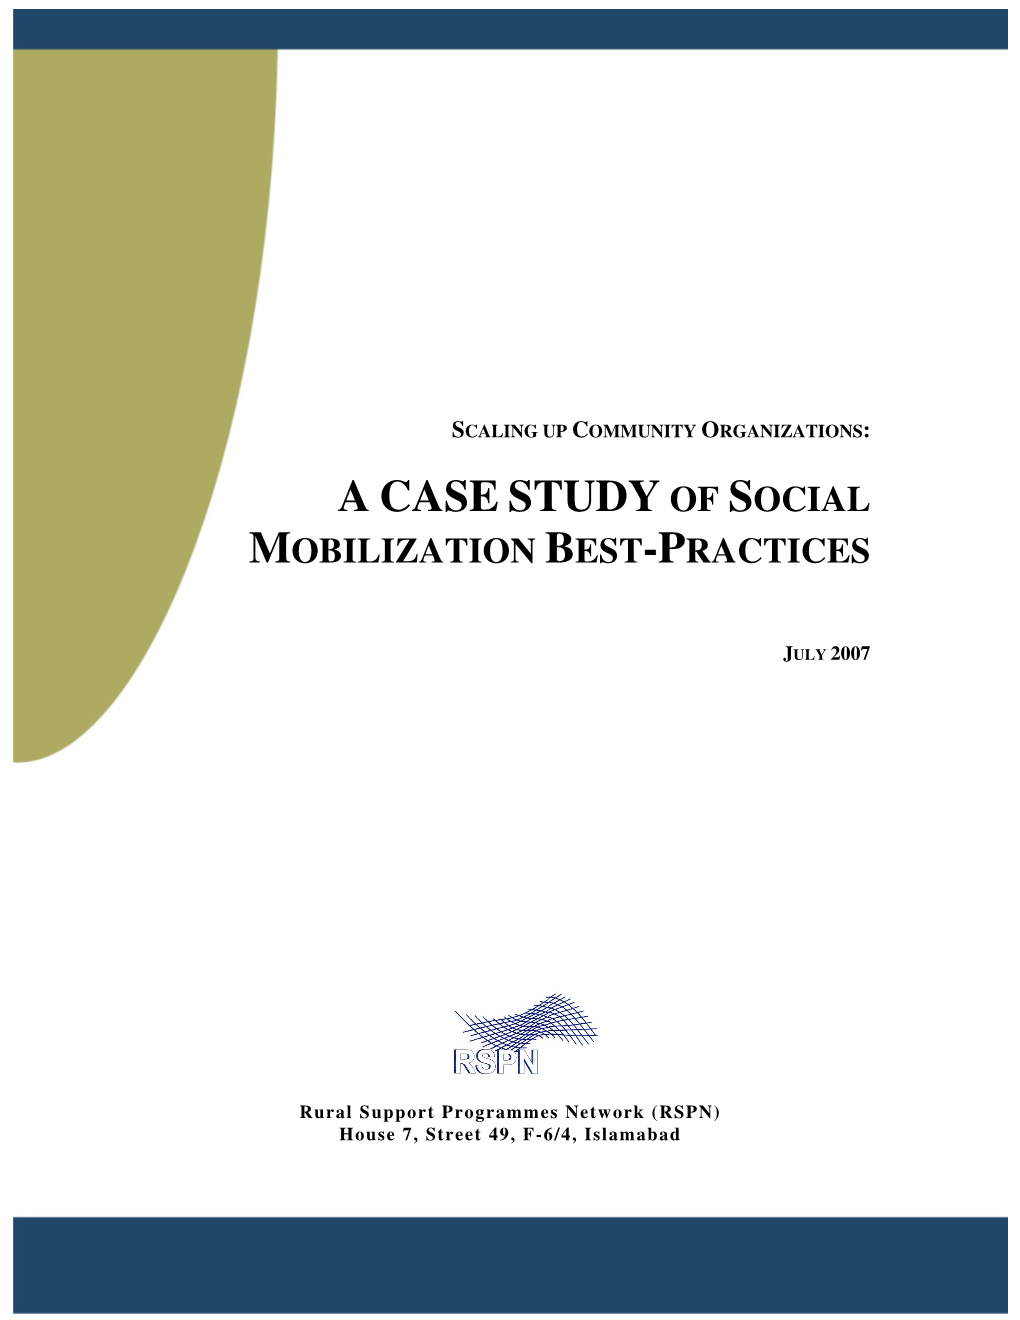 A Case Study of Social Mobilization Best-Practices